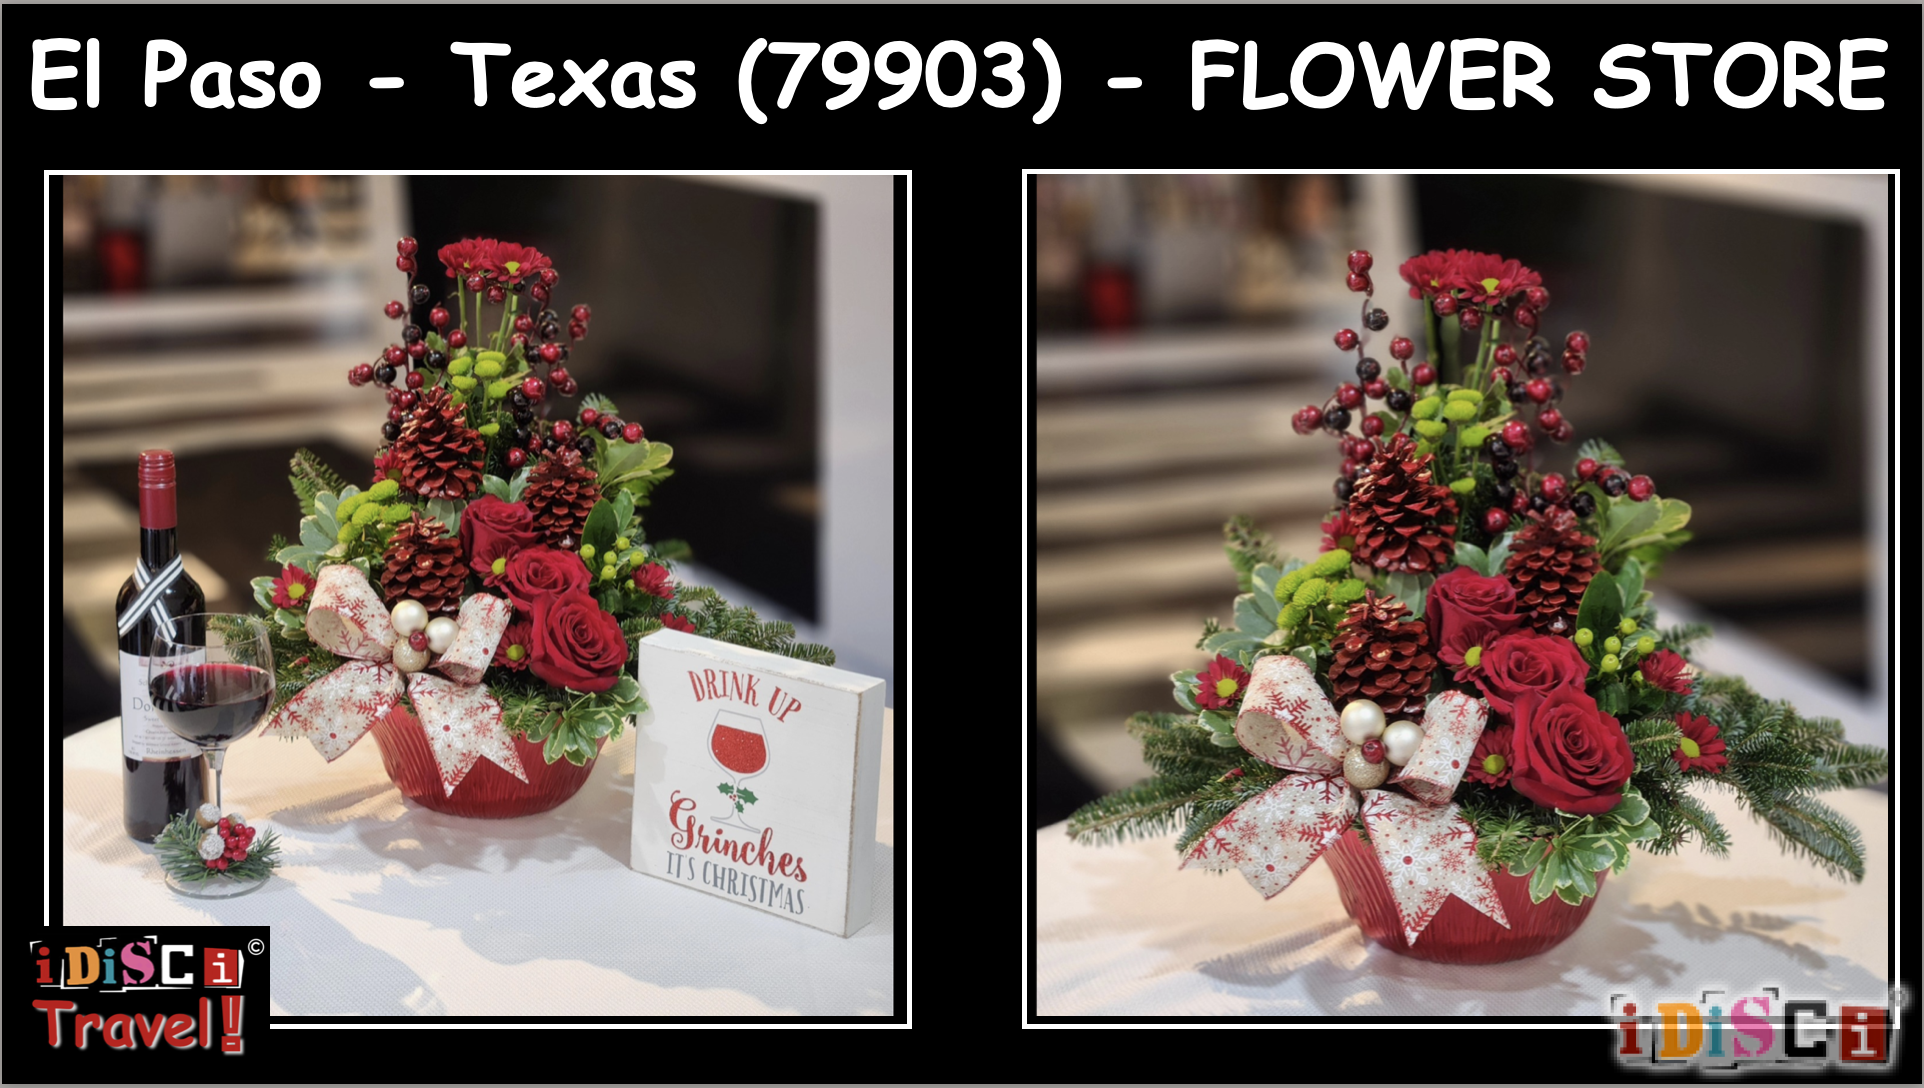 El Paso Texas, 79903, Five Points West, THE GIFT BOX, Cozy Café, Flower Shop, Cake Shop, Chocolate Shop, Wine Shop / Efficient Delivery Service / Everything Custom-Tailored for a special occasion!